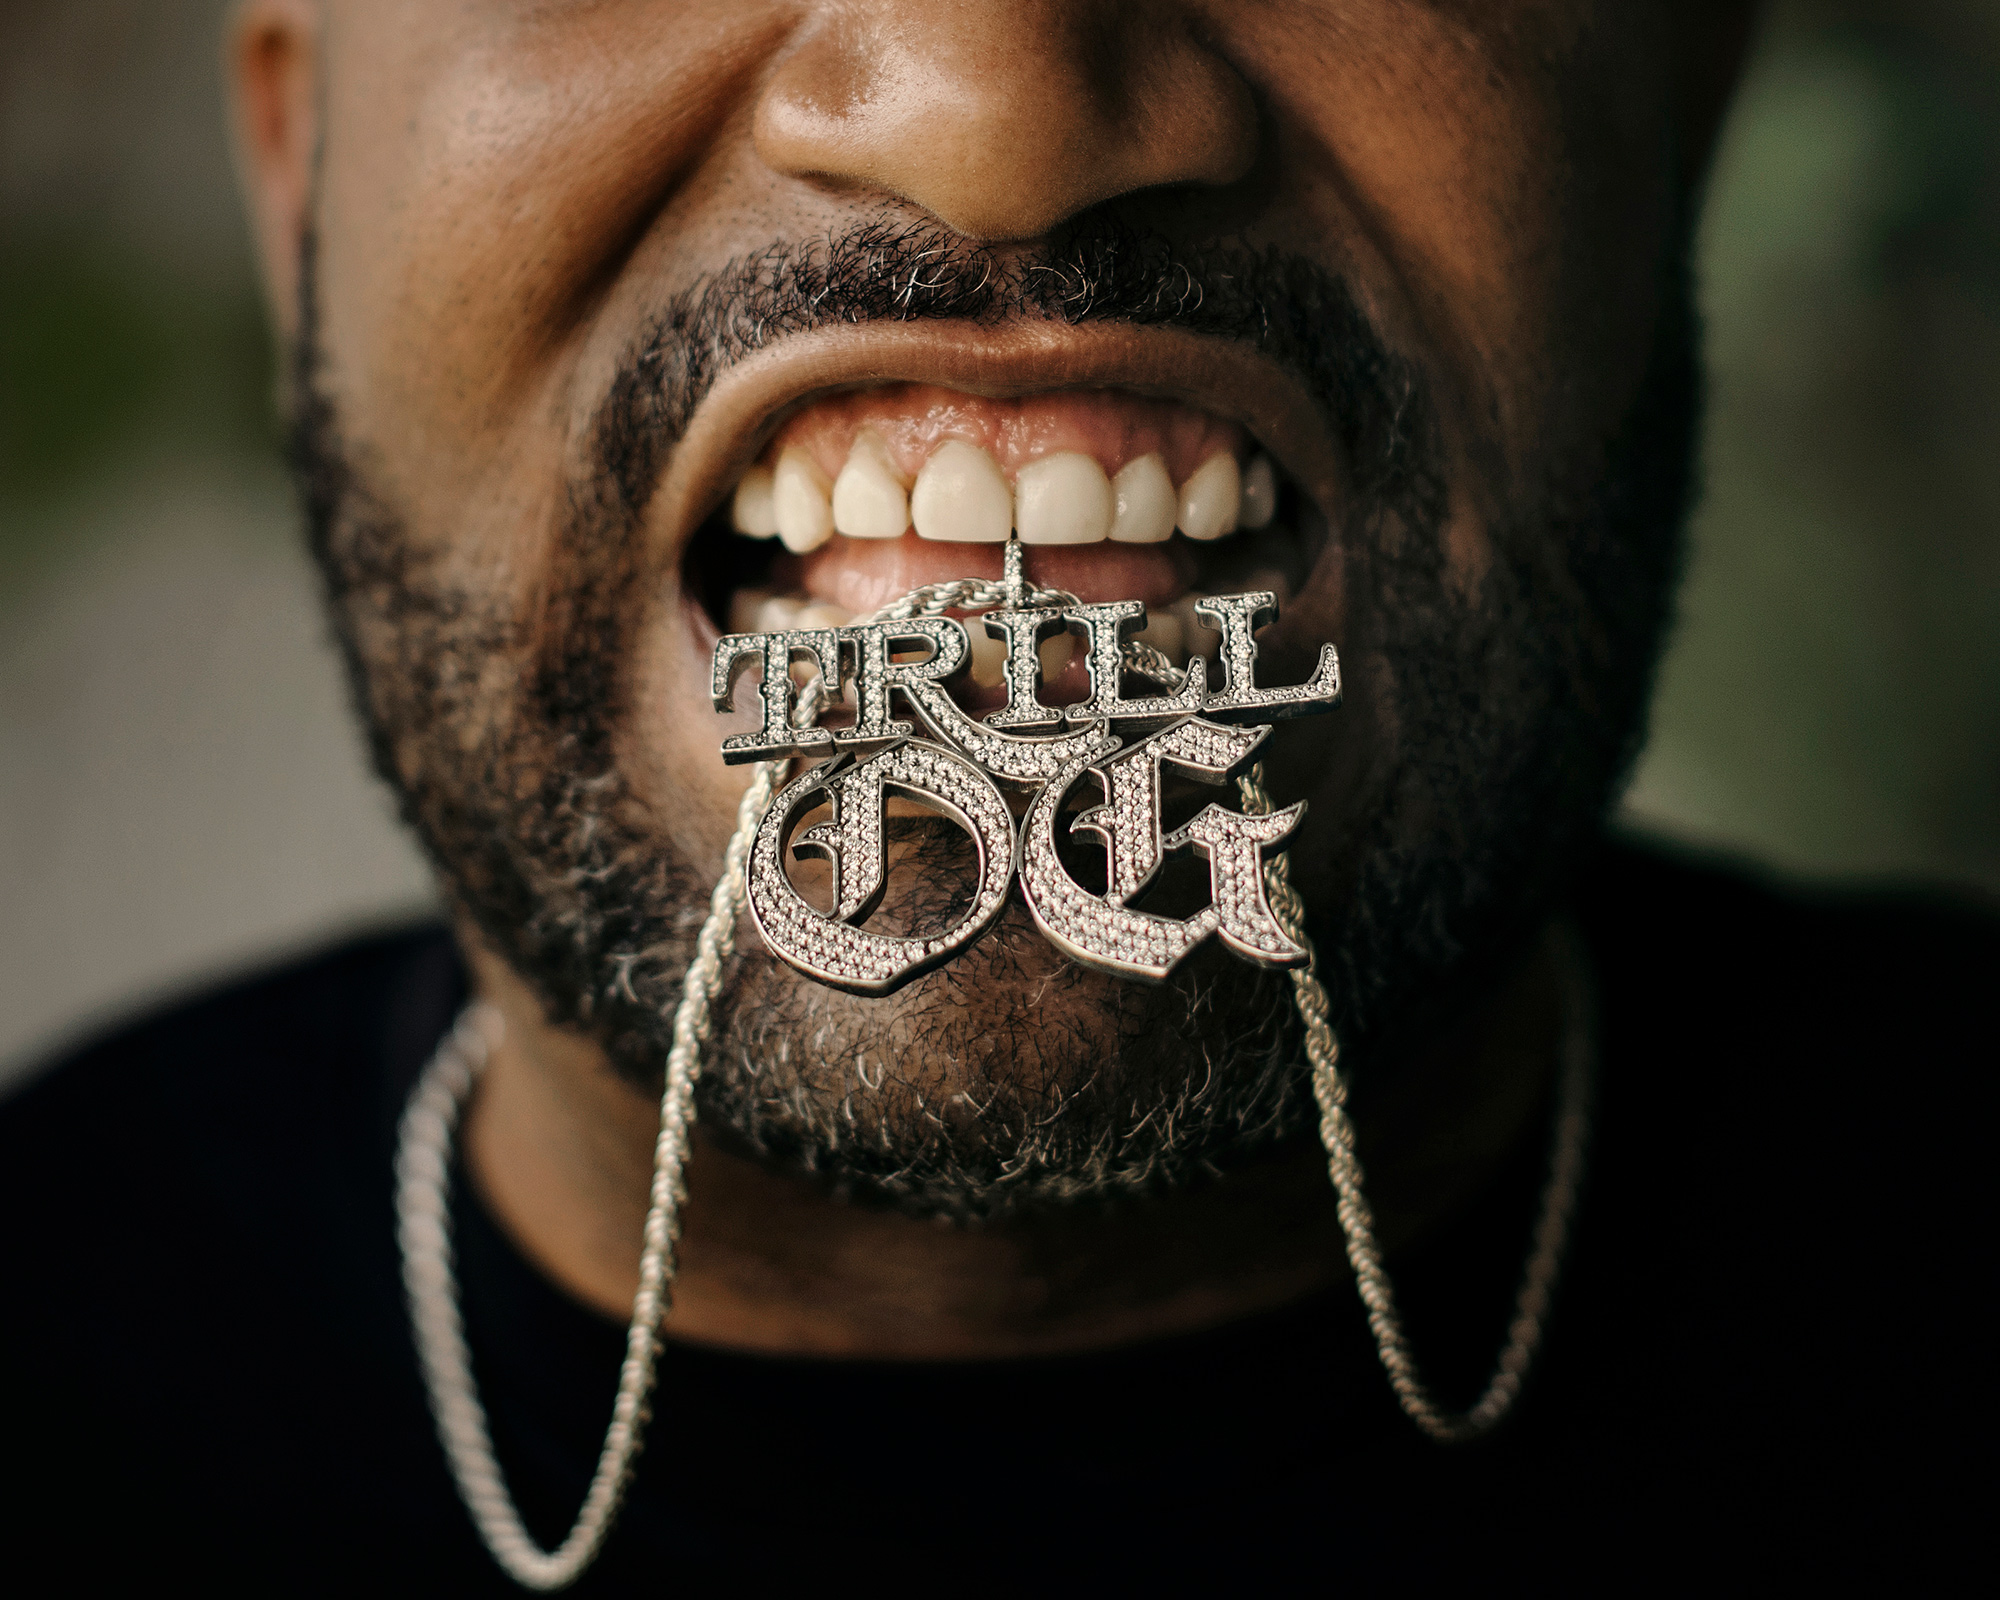 Bun B, hip hop artist, professor, and one half of legendary rap duo, UGK, and his "Trill OG" piece and chain, photographed on location in Houston, Texas by Houston music photographer, Todd Spoth.